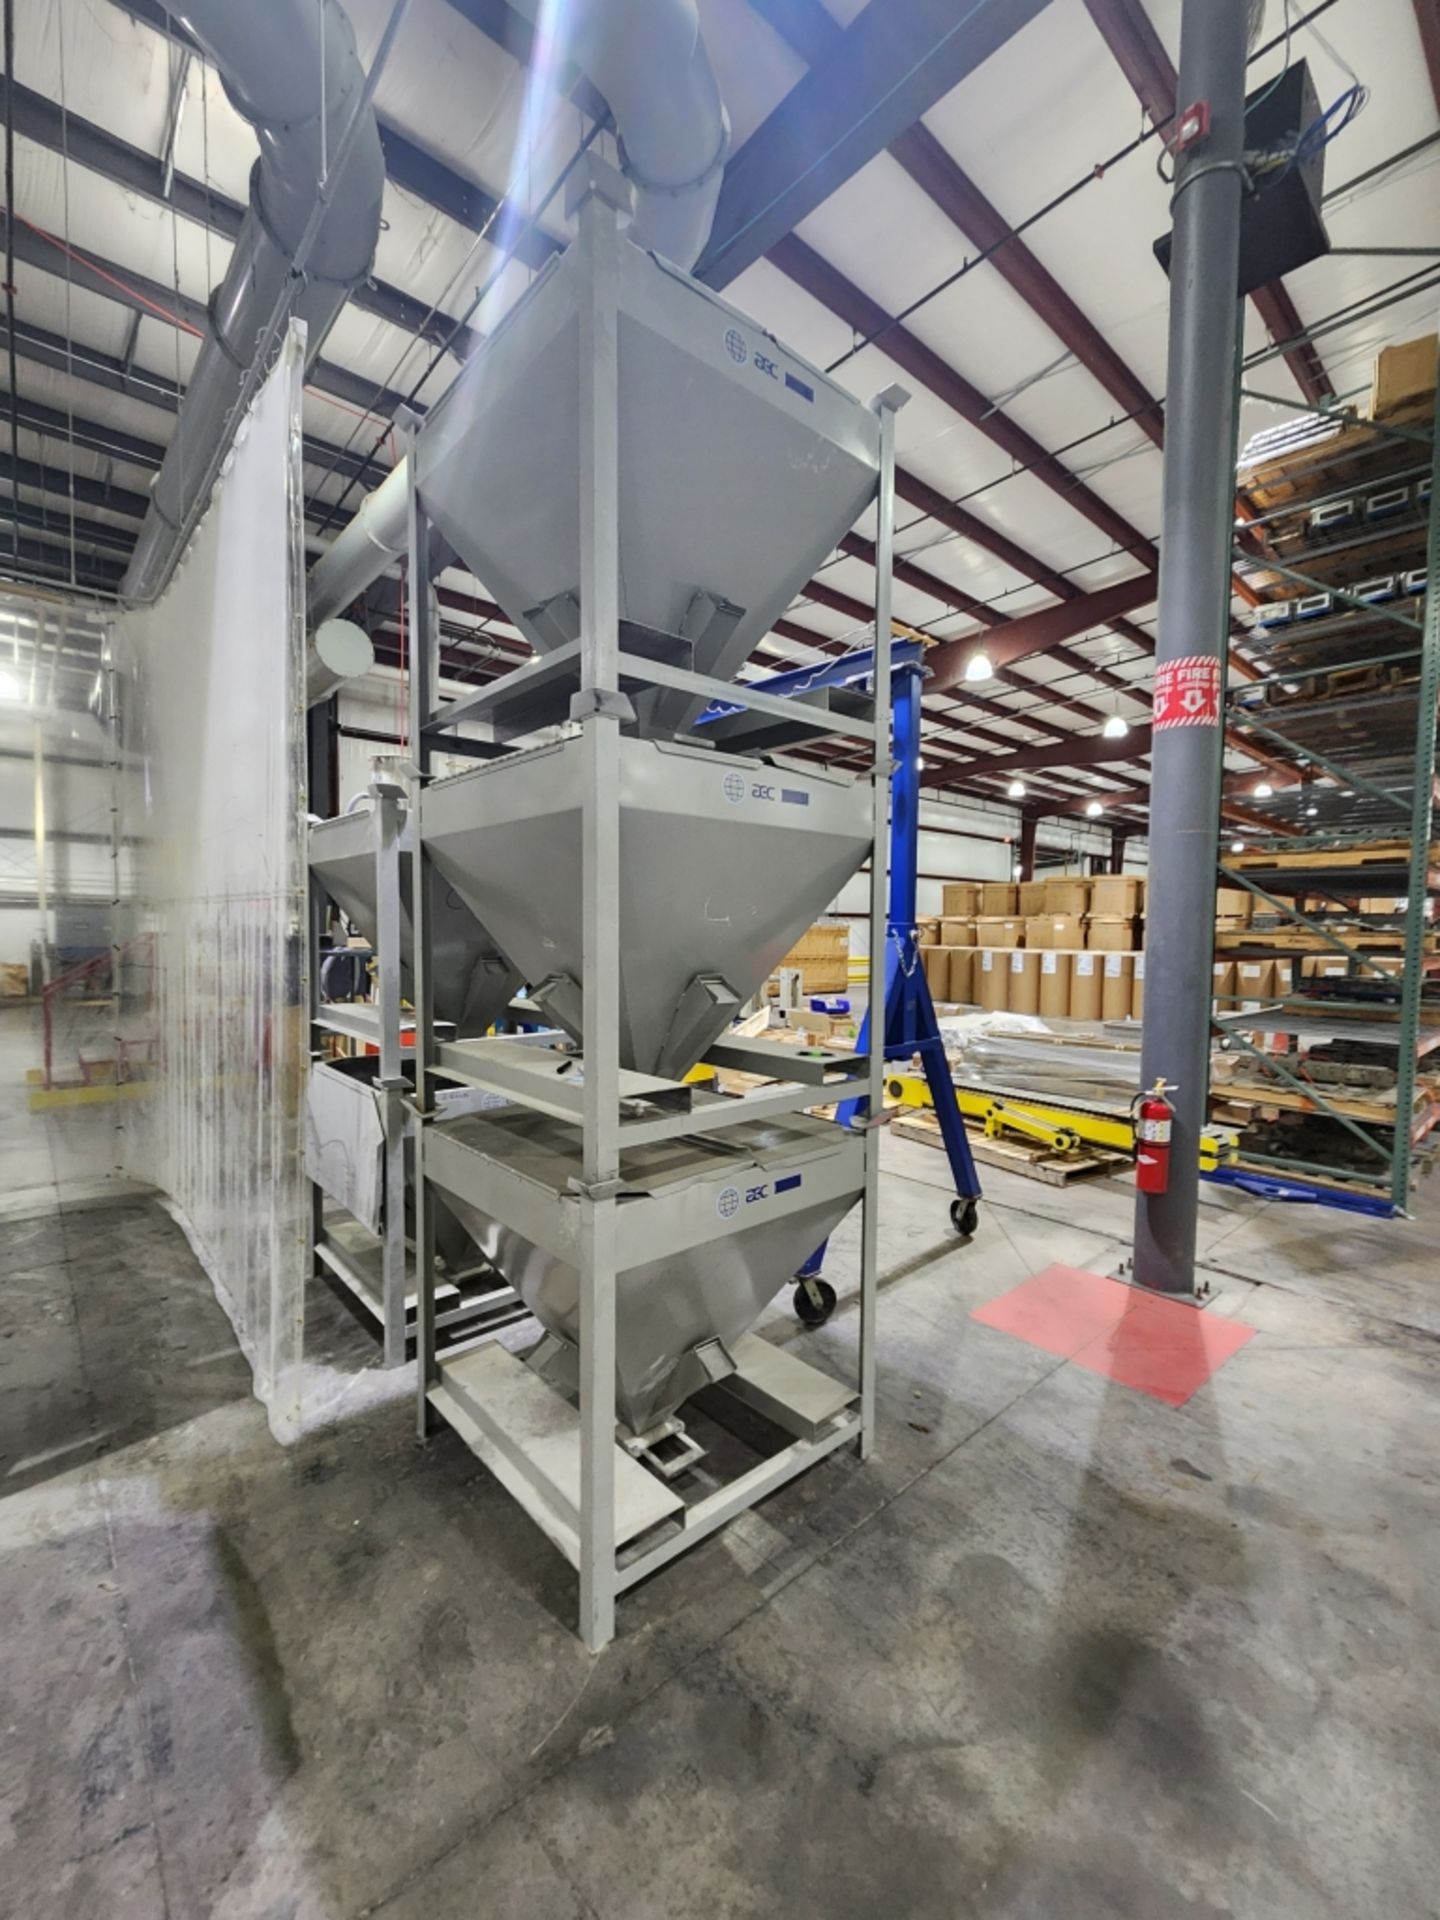 AEC bulk bag unloader system, Model: A248675-01C SN: E101810227-3-1, with five spare bins - Image 6 of 8